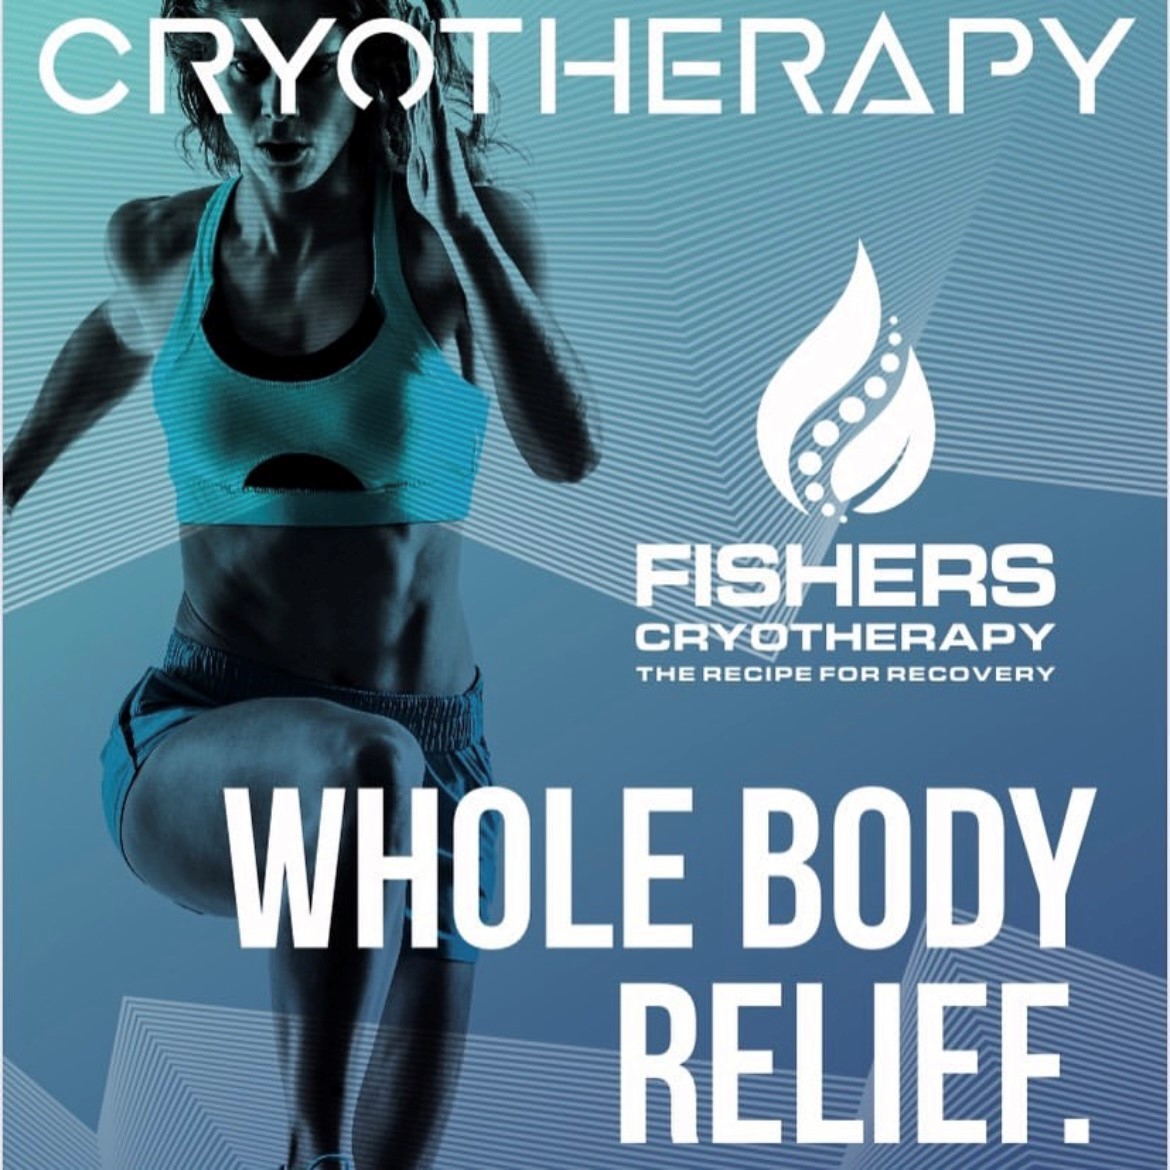 cryotherapy. fishers cryotherapy, the recipe for recovery. whole body relief.